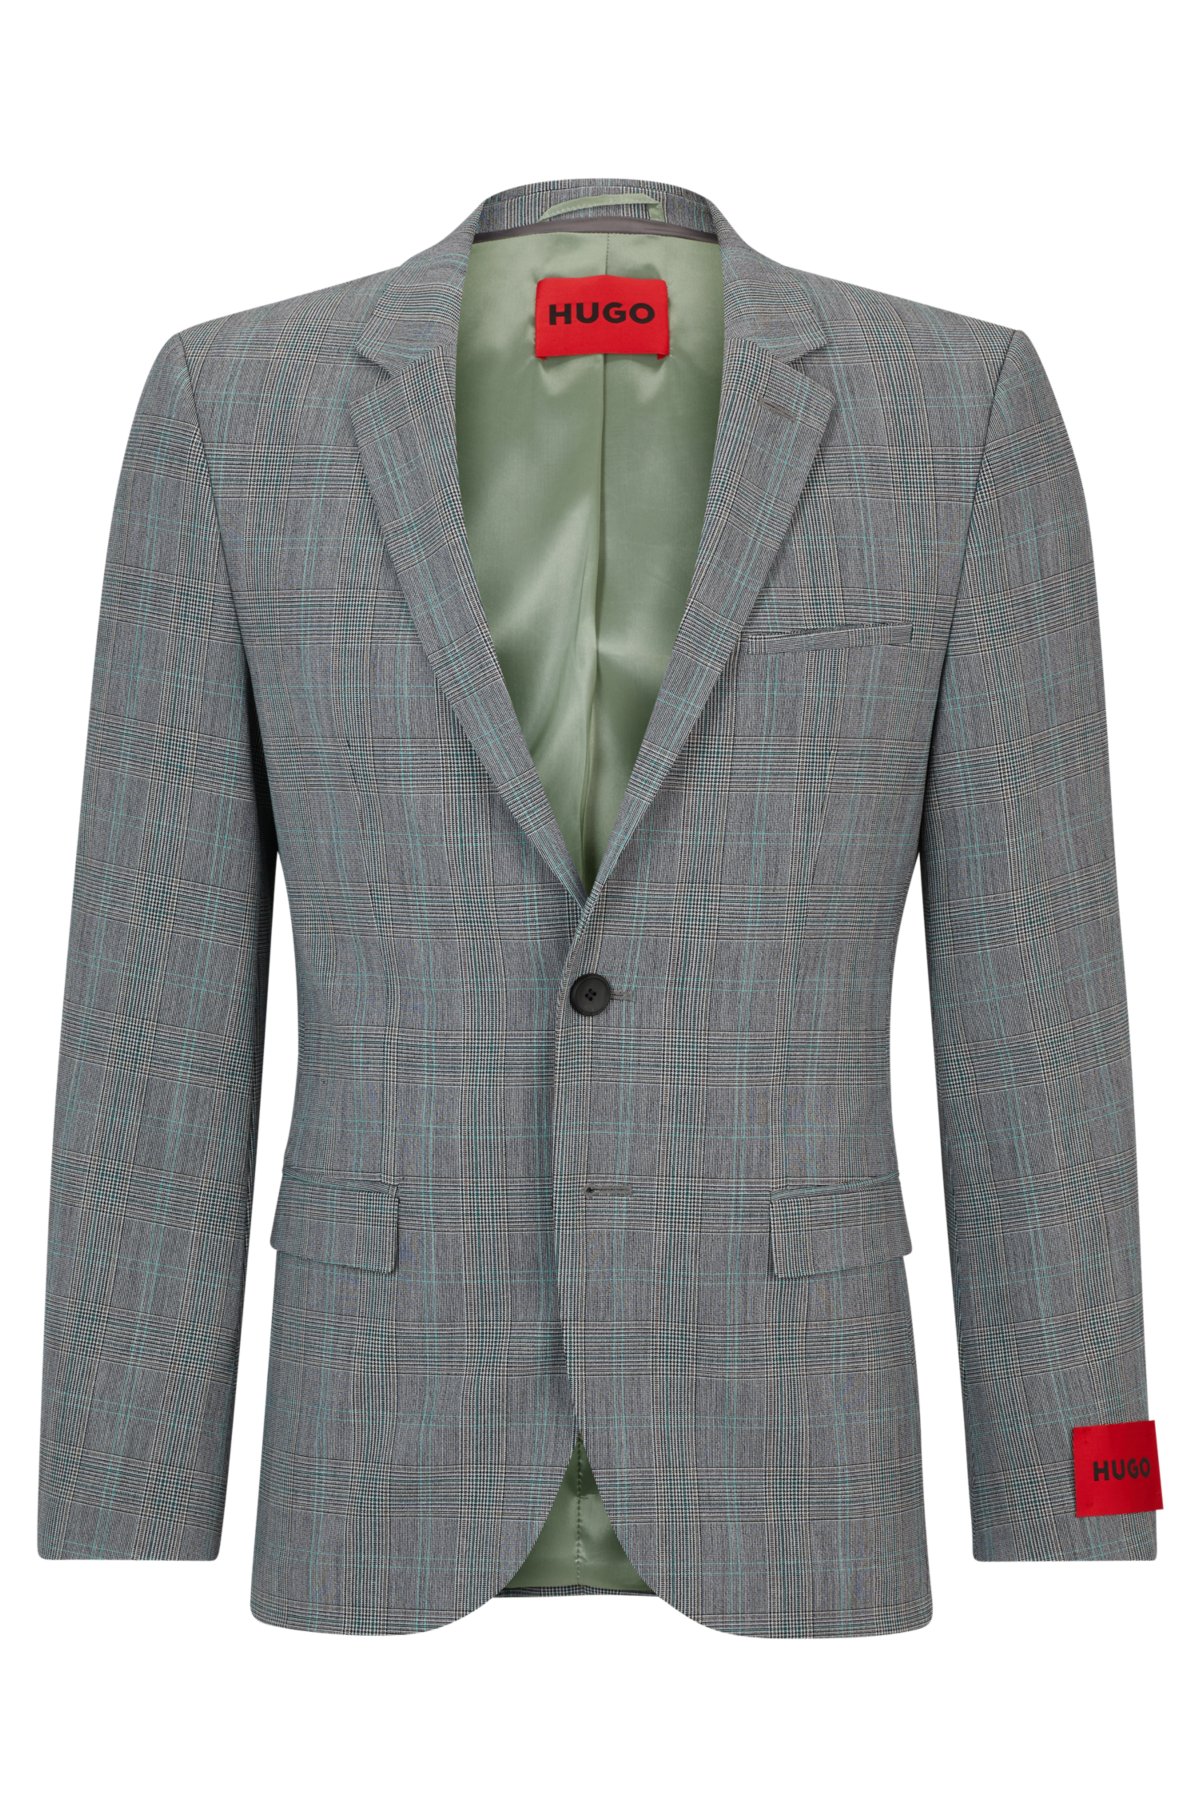 Extra-slim-fit jacket in checked super-flex fabric